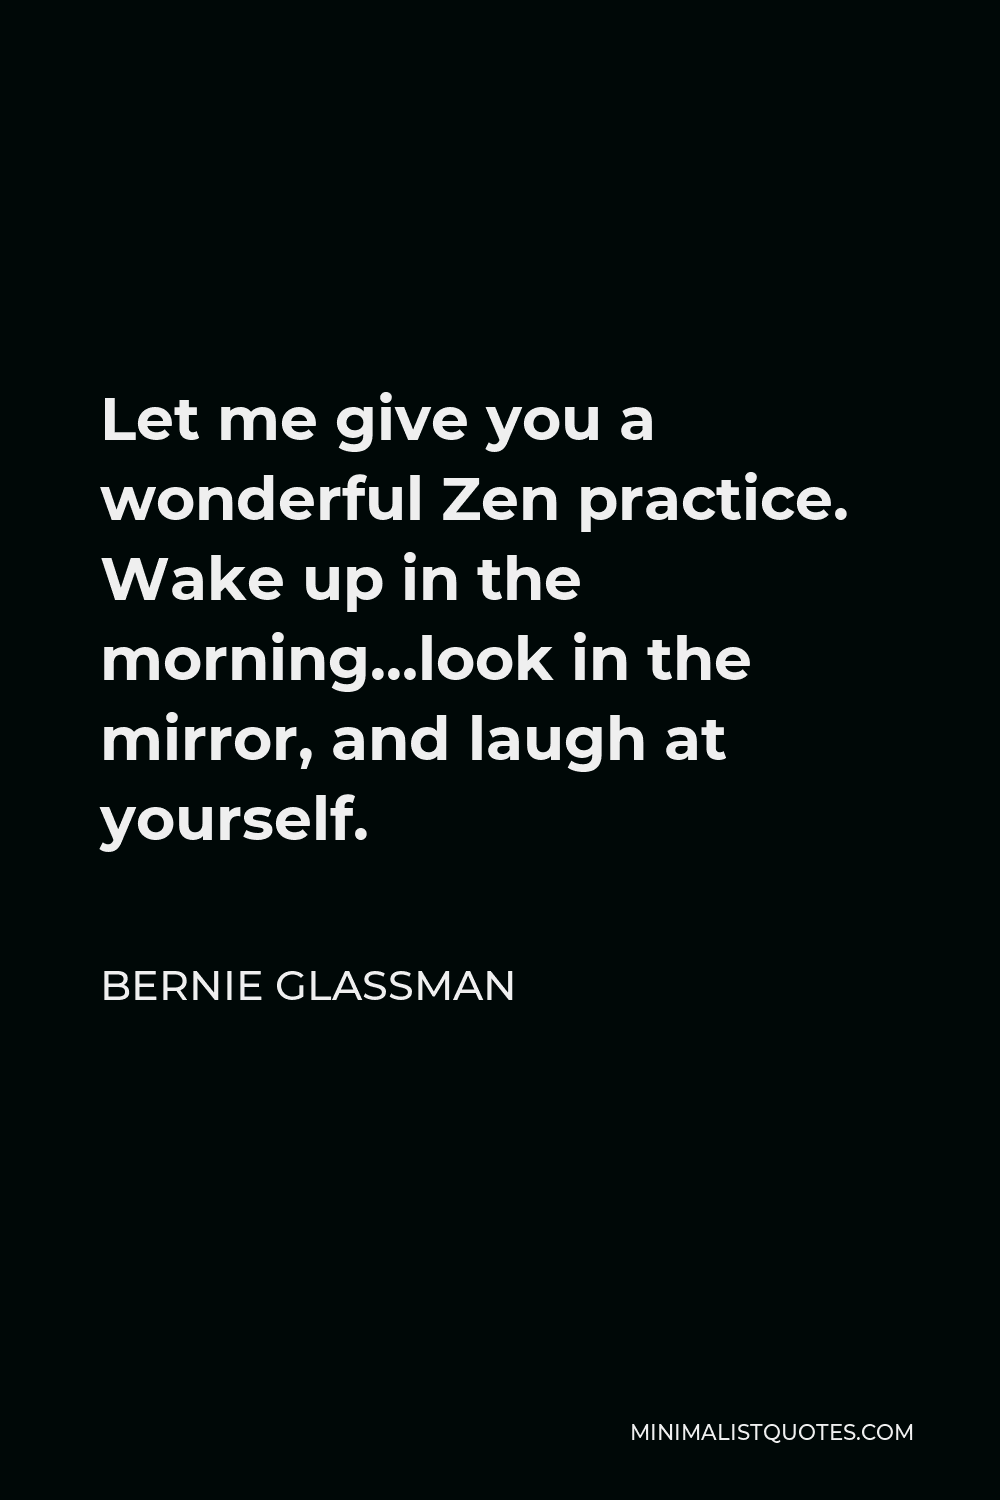 Bernie Glassman Quote - Let me give you a wonderful Zen practice. Wake up in the morning…look in the mirror, and laugh at yourself.